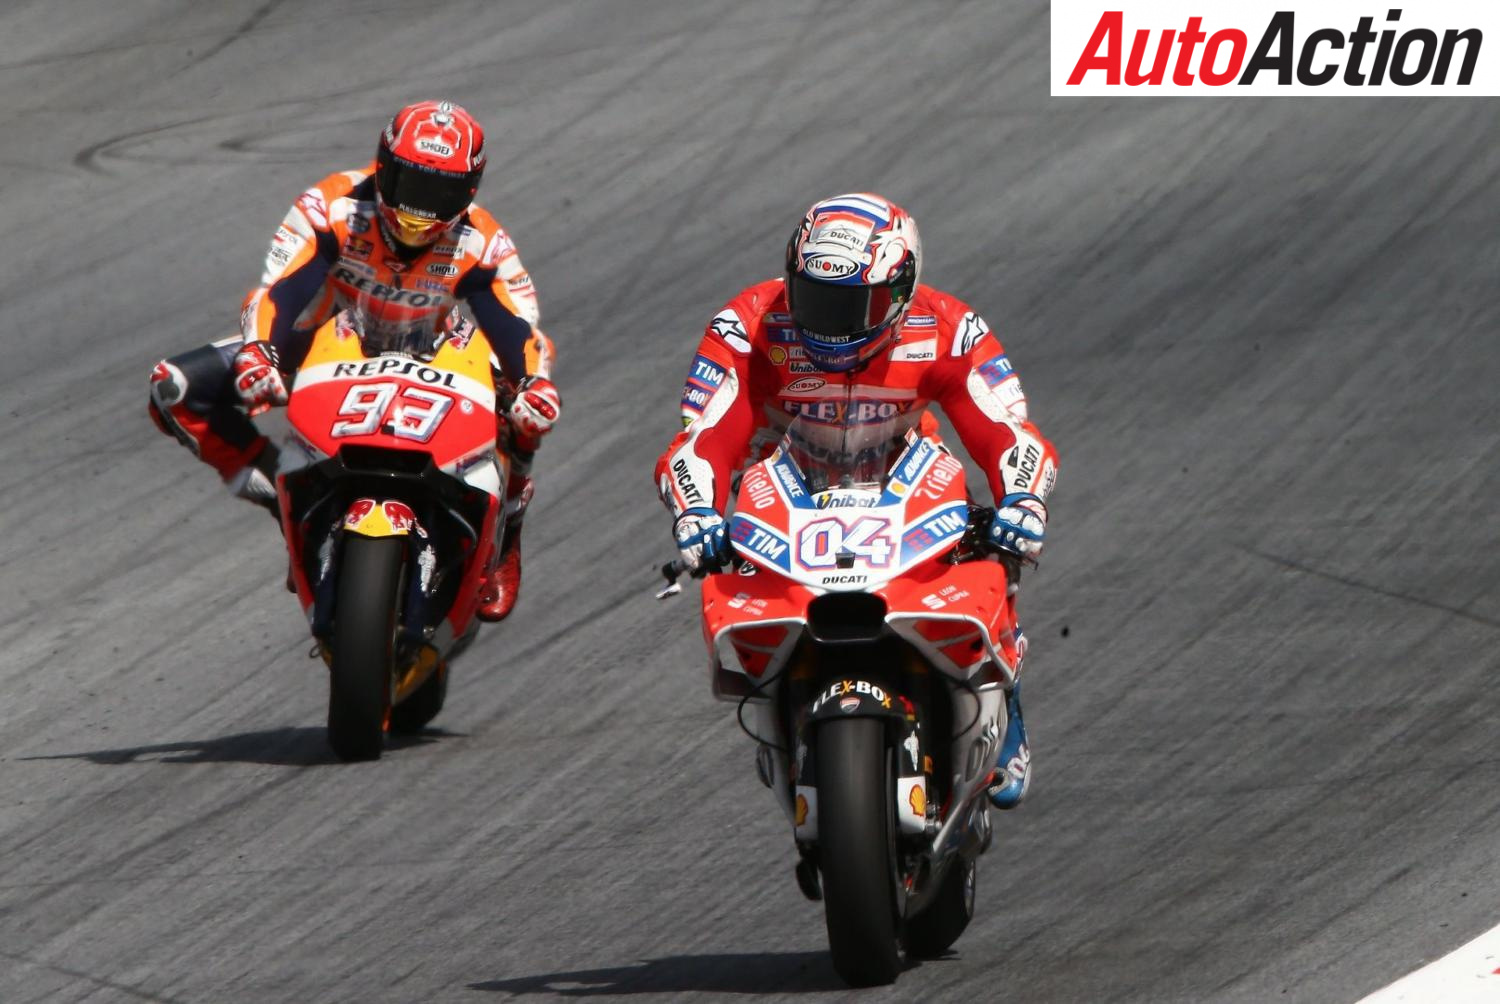 Andrea Dovizioso and Marc Marquez battling for the lead in the MotoGP race at the Red Bull Ring - Photo: LAT